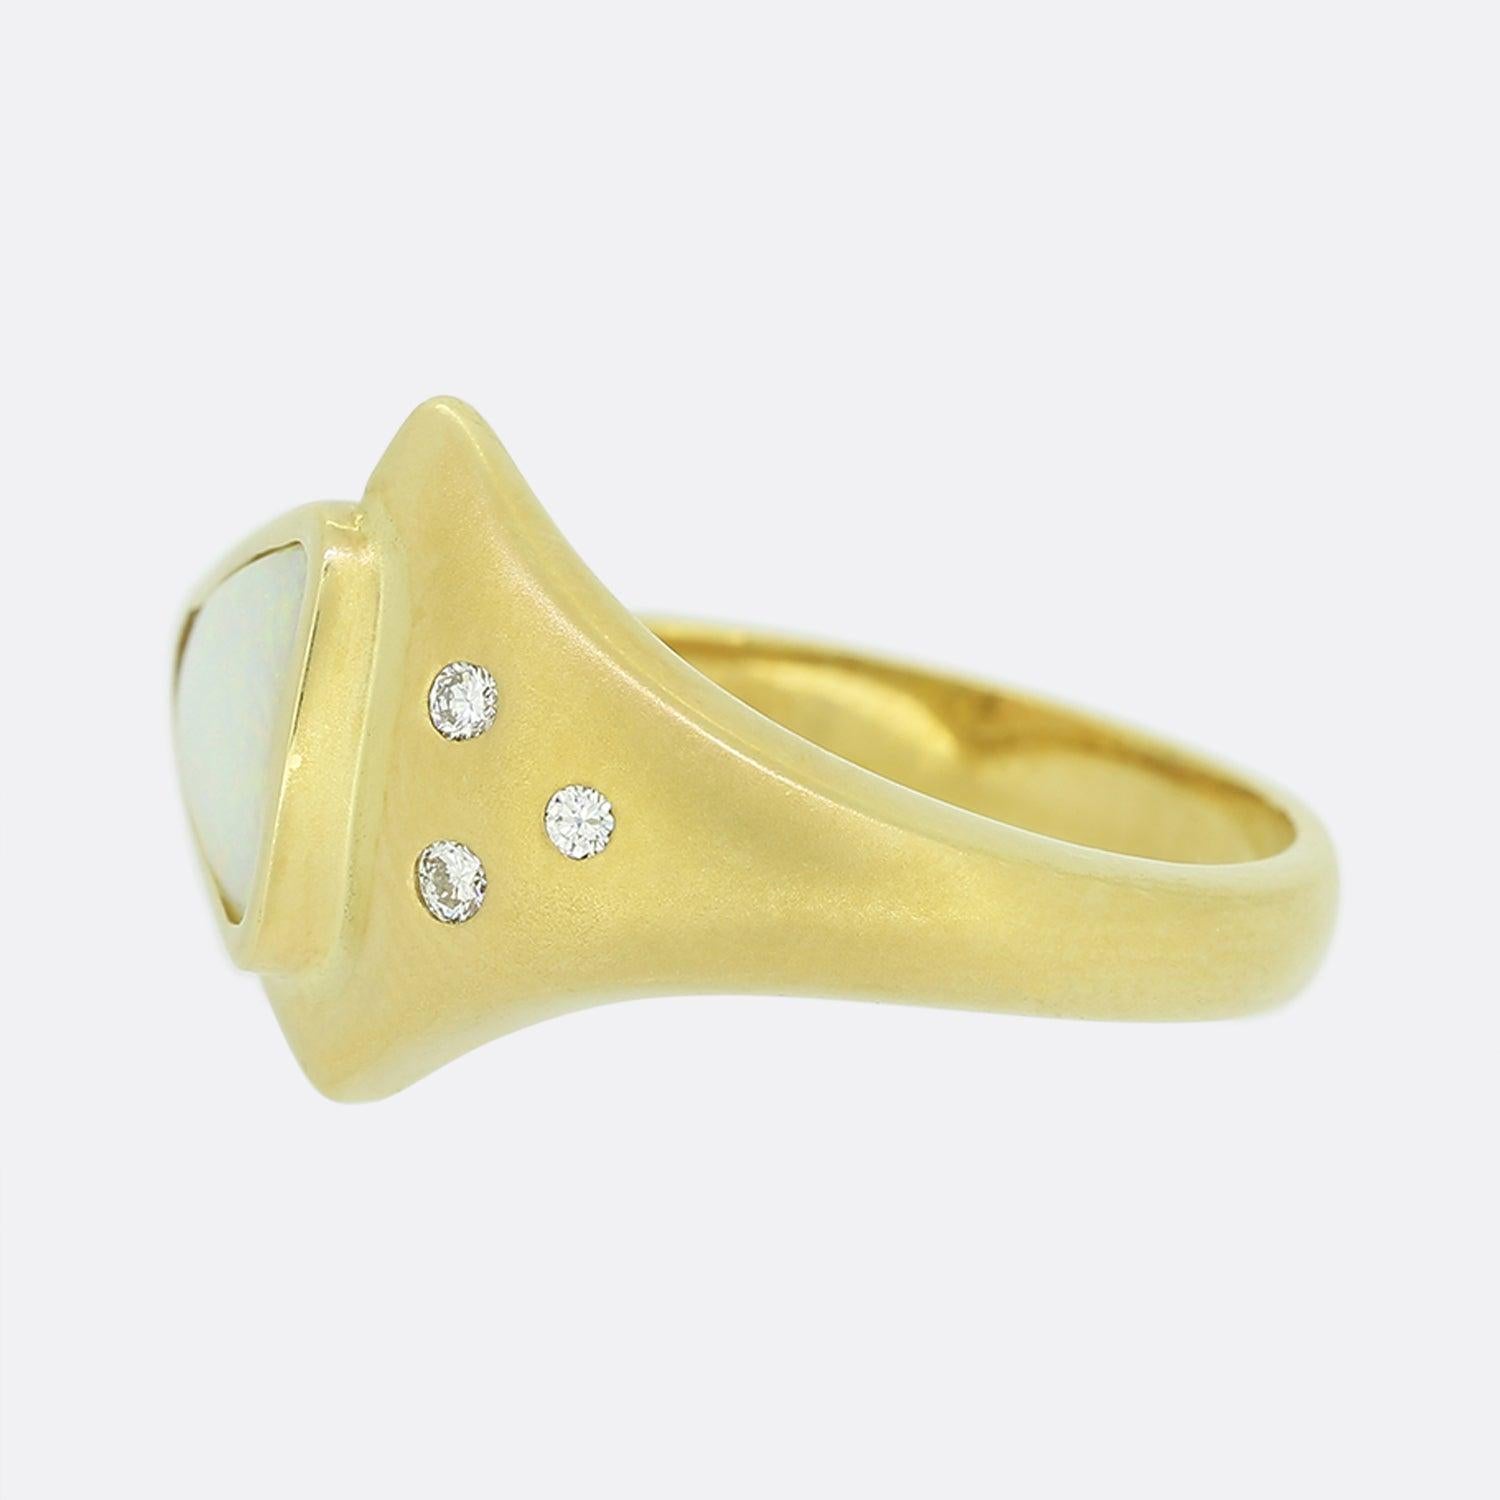 This is an 18ct yellow gold white opal and diamond abstract ring. The central opal is rub-over set, triangular shaped and has an excellent white body of colour. This focal stone plays host to a trio of round cut natural diamonds; all of which sit